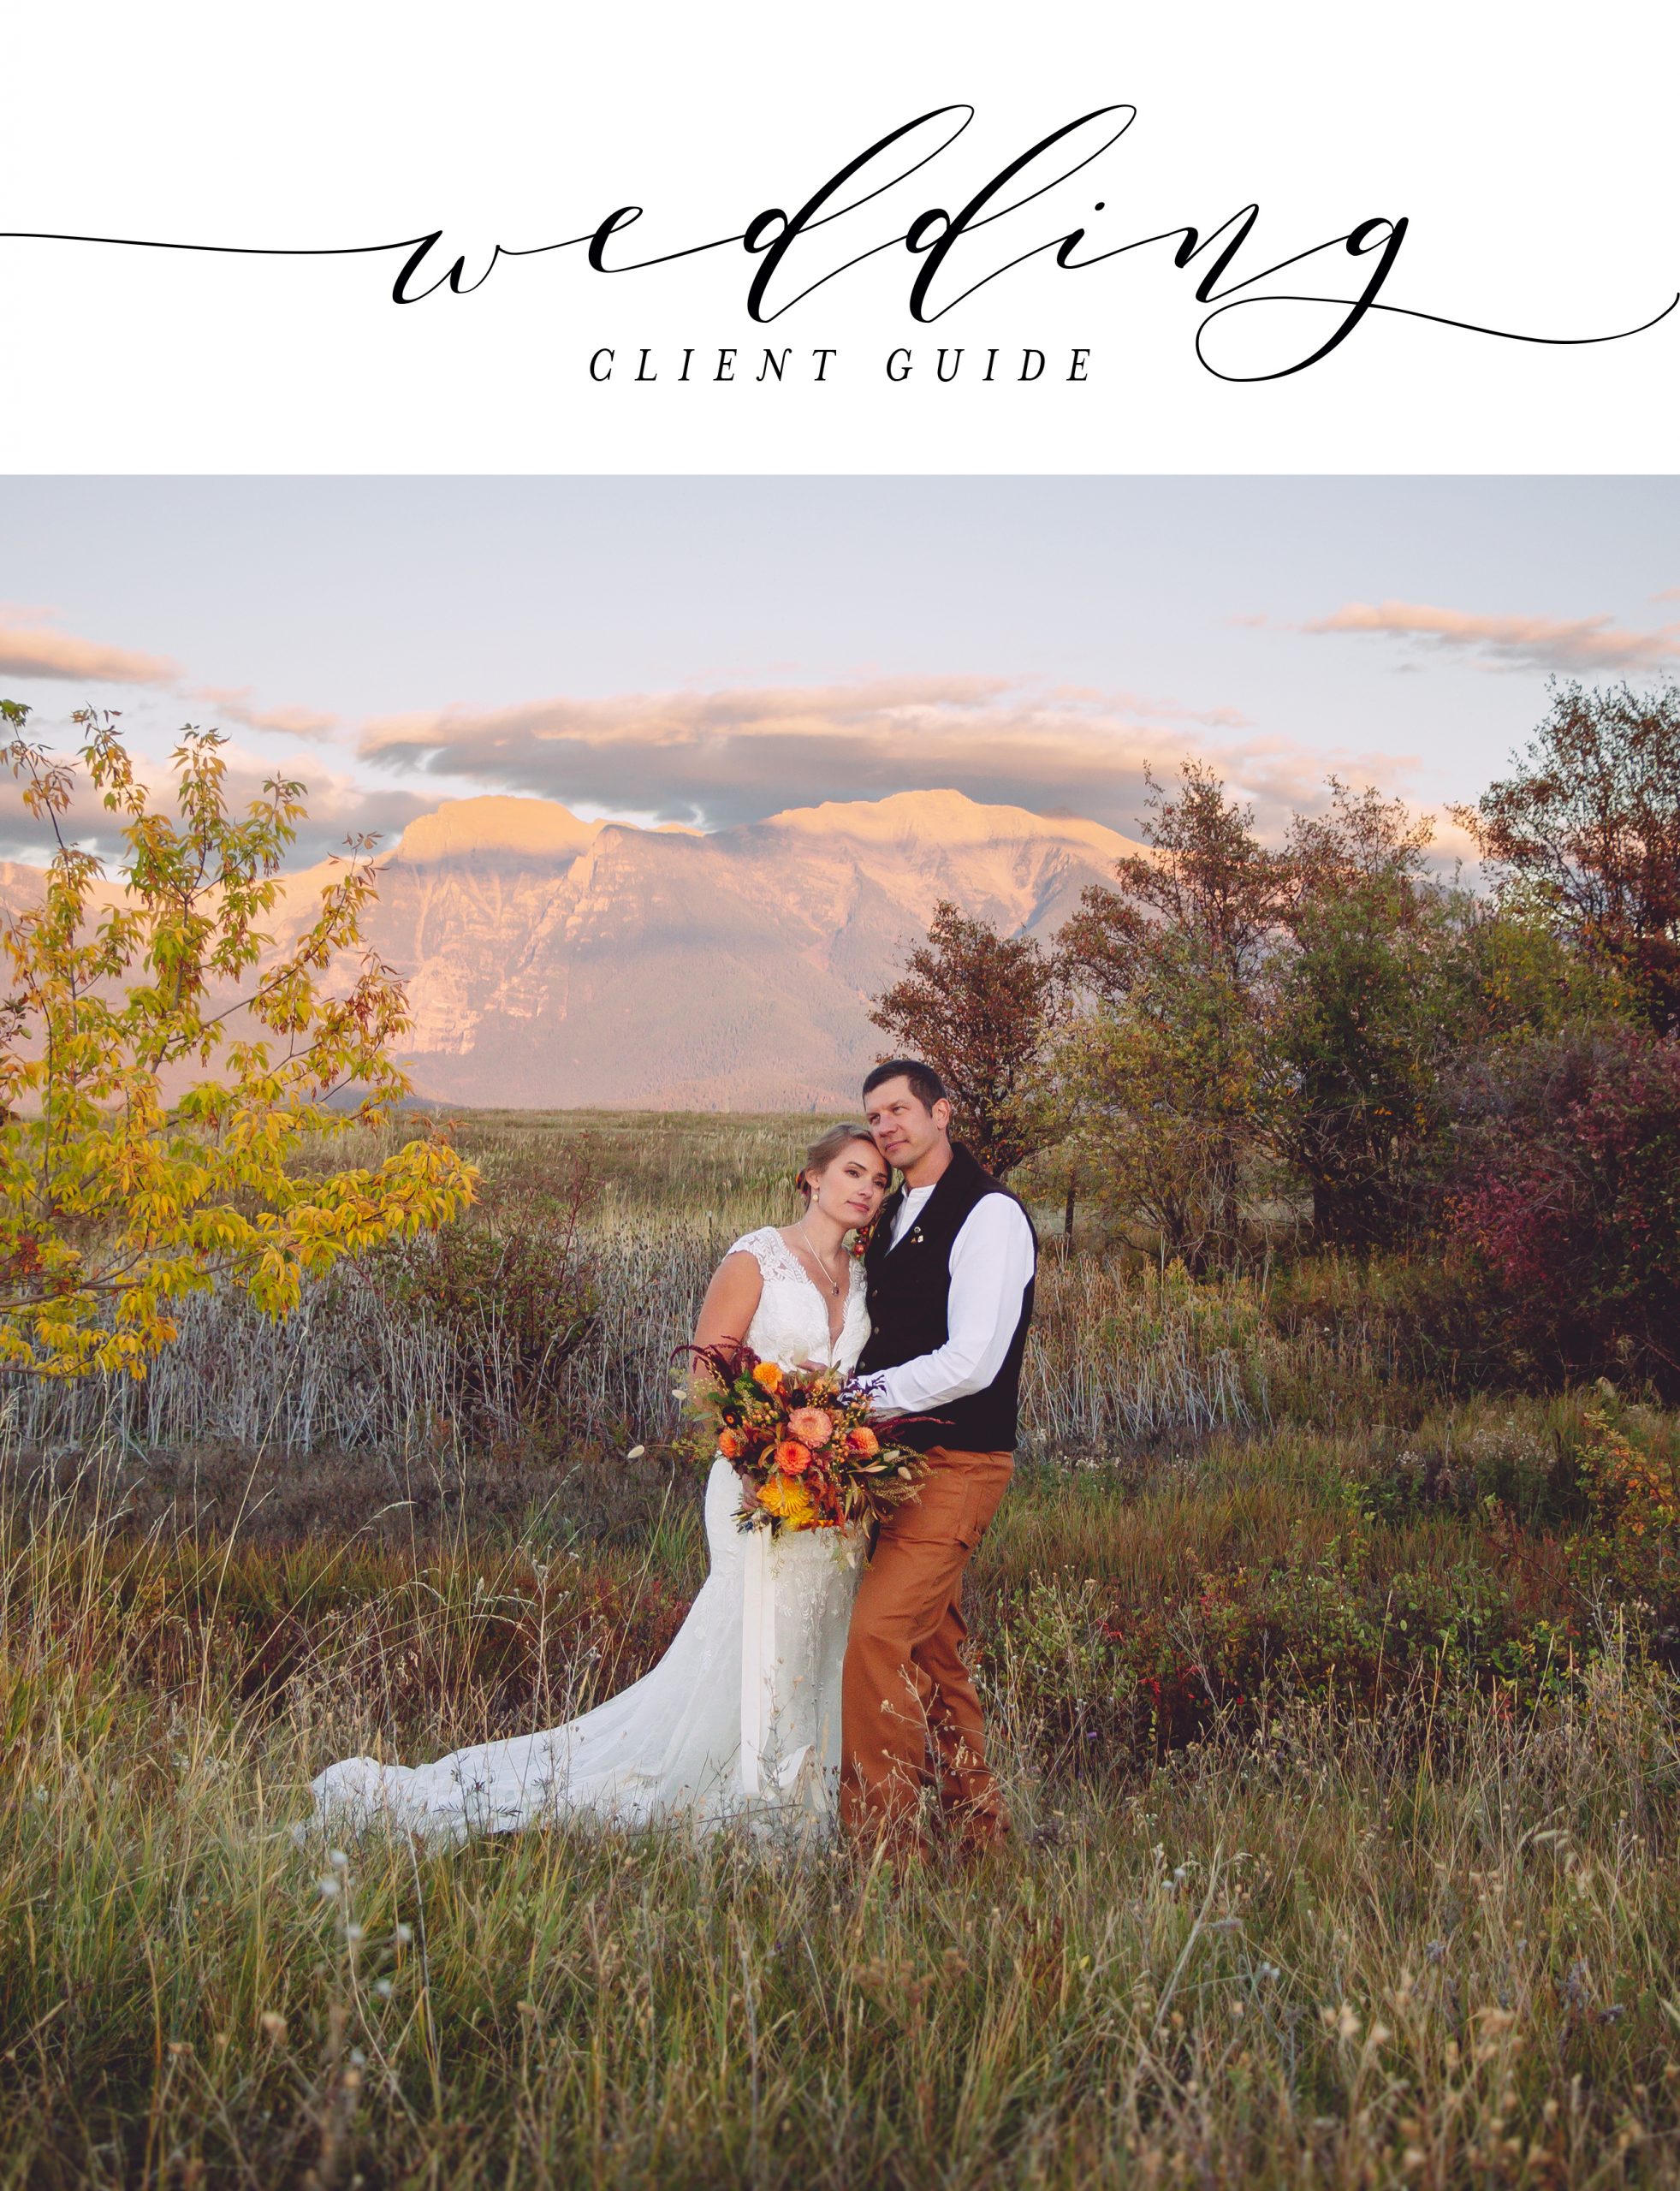 Whitney-Sarah-Photography - Wedding Client Guide